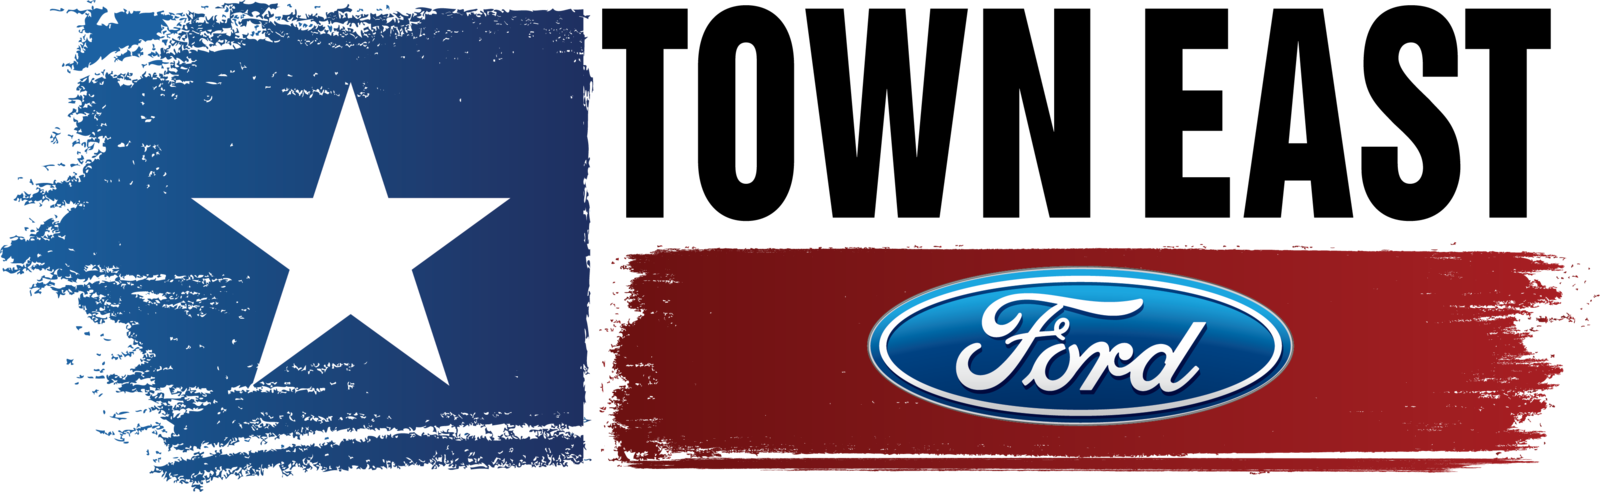 Town East Ford Mesquite Tx Read Consumer Reviews - Art Plates Brand Mouse Pad - Ford Logo - Blue (1600x492)